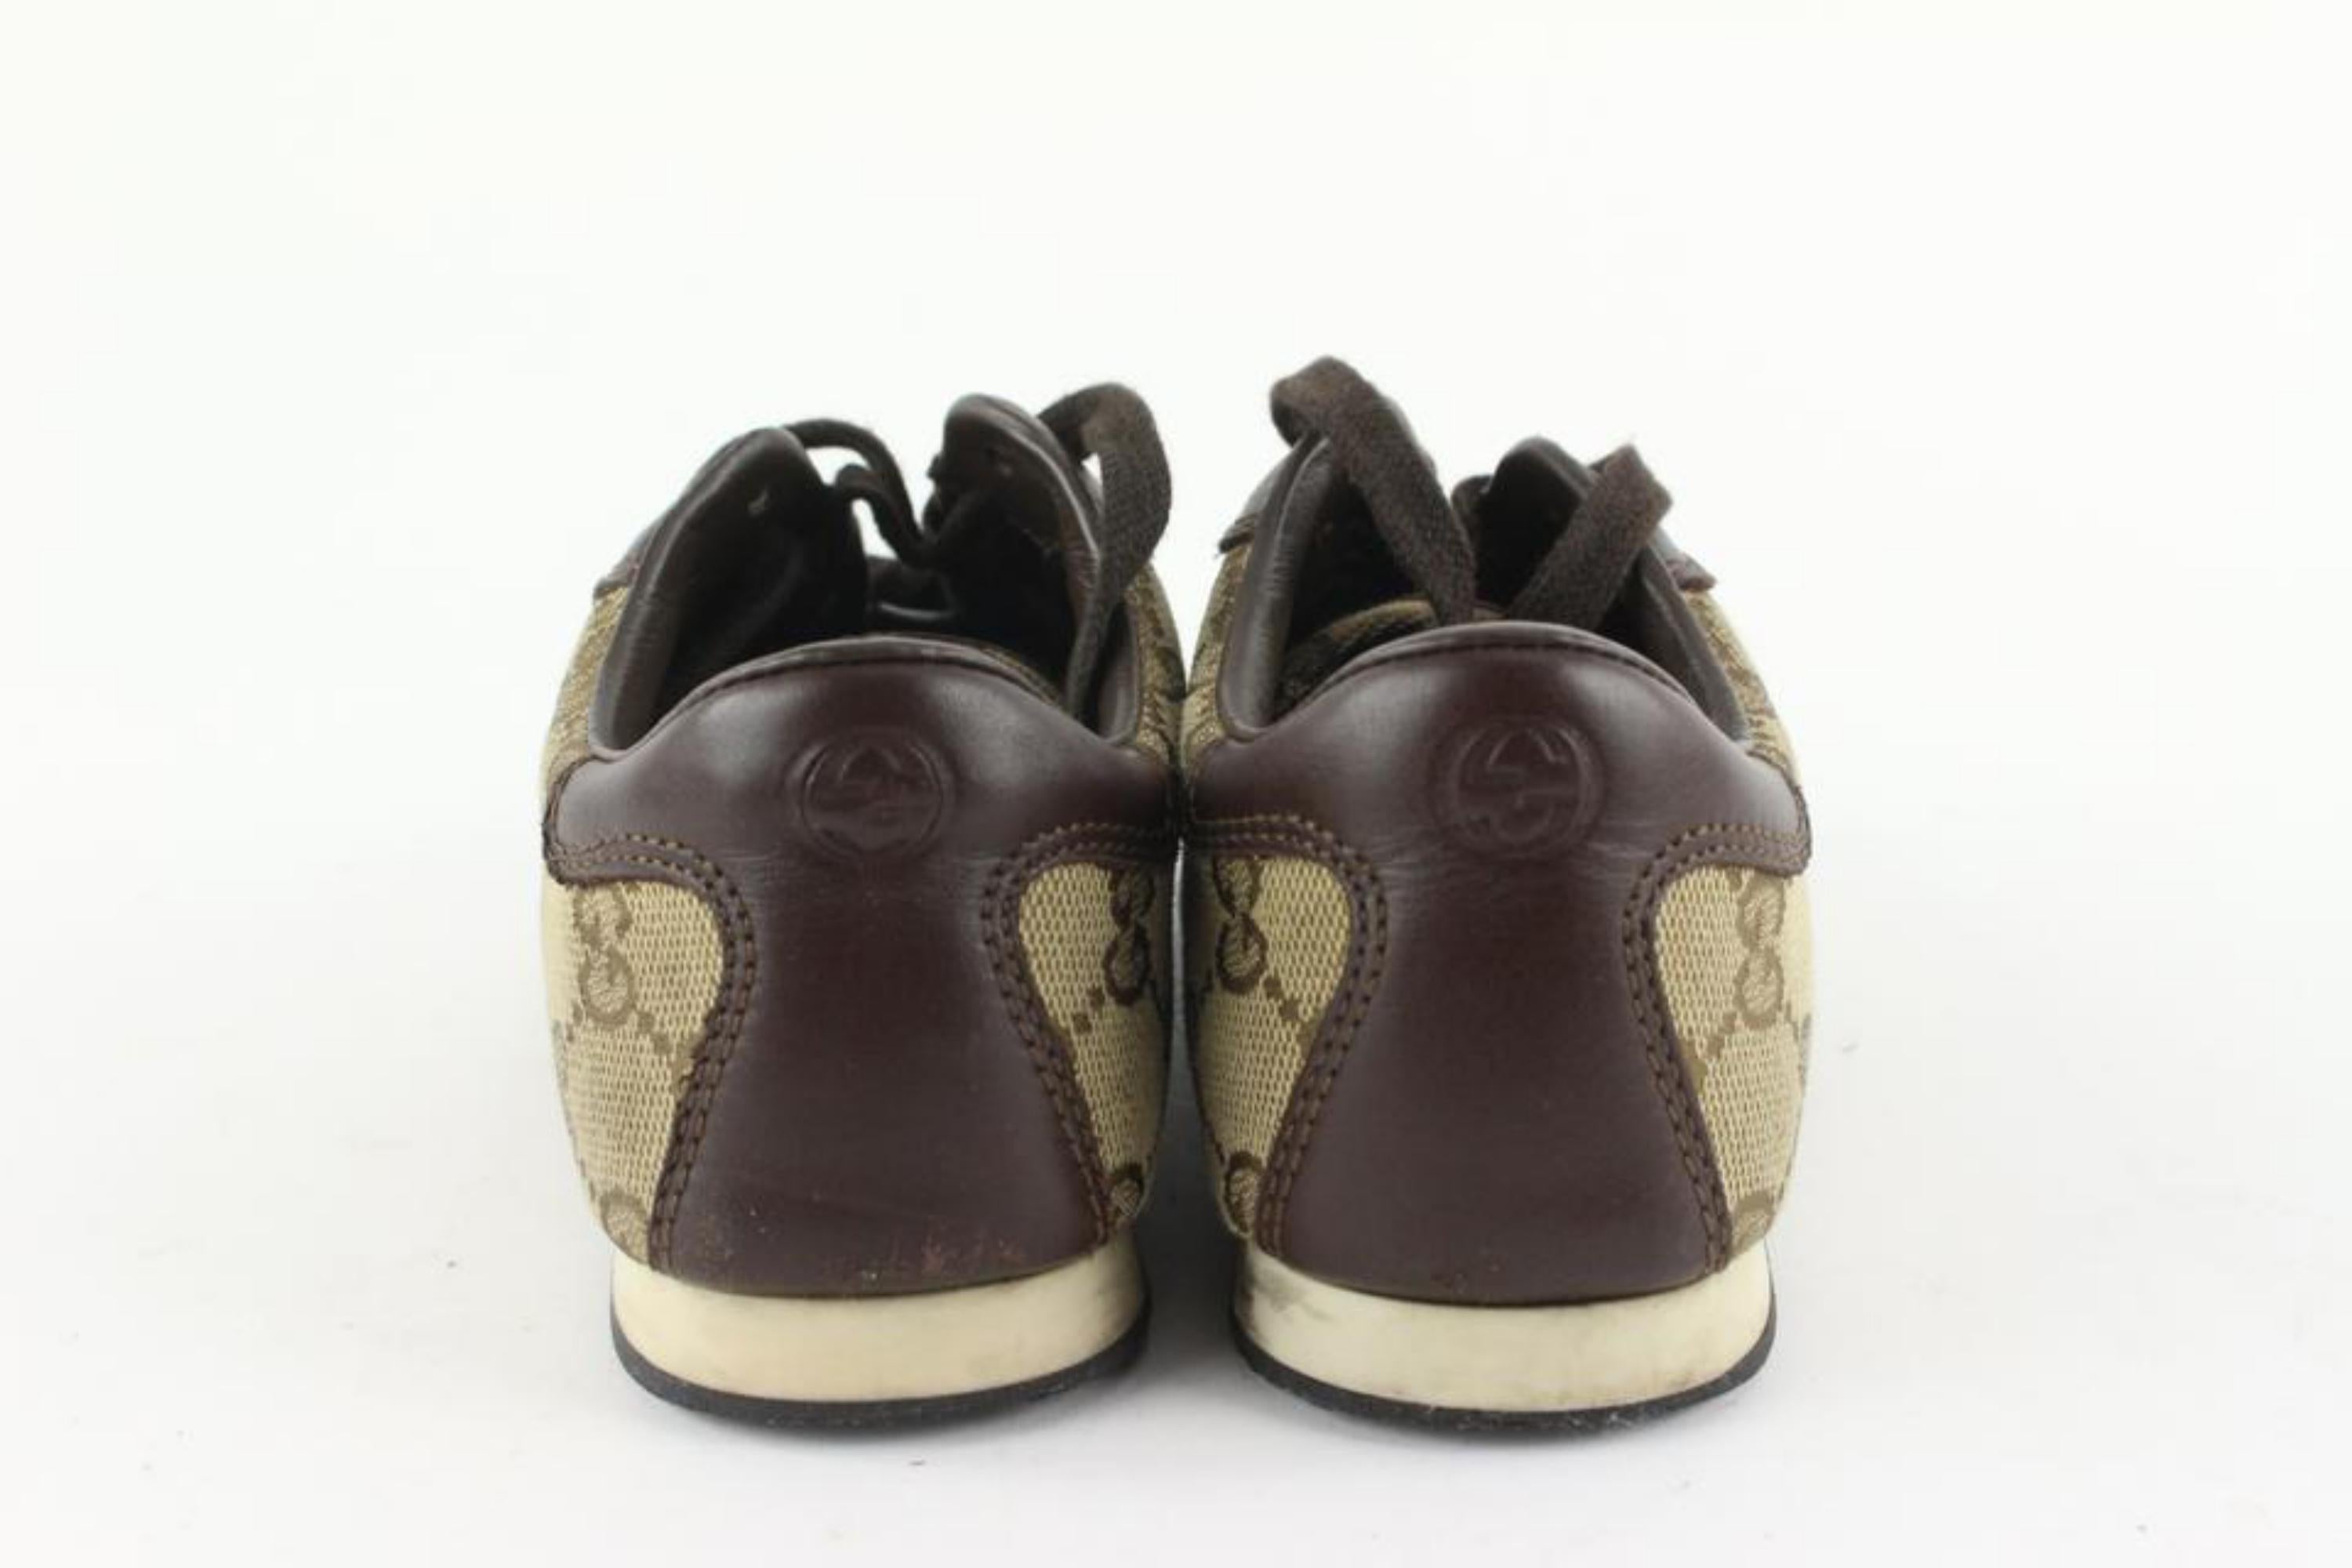 Gucci 1.5 US Kids Size Monogram GG Web Sneaker 1223g12 In Good Condition For Sale In Dix hills, NY